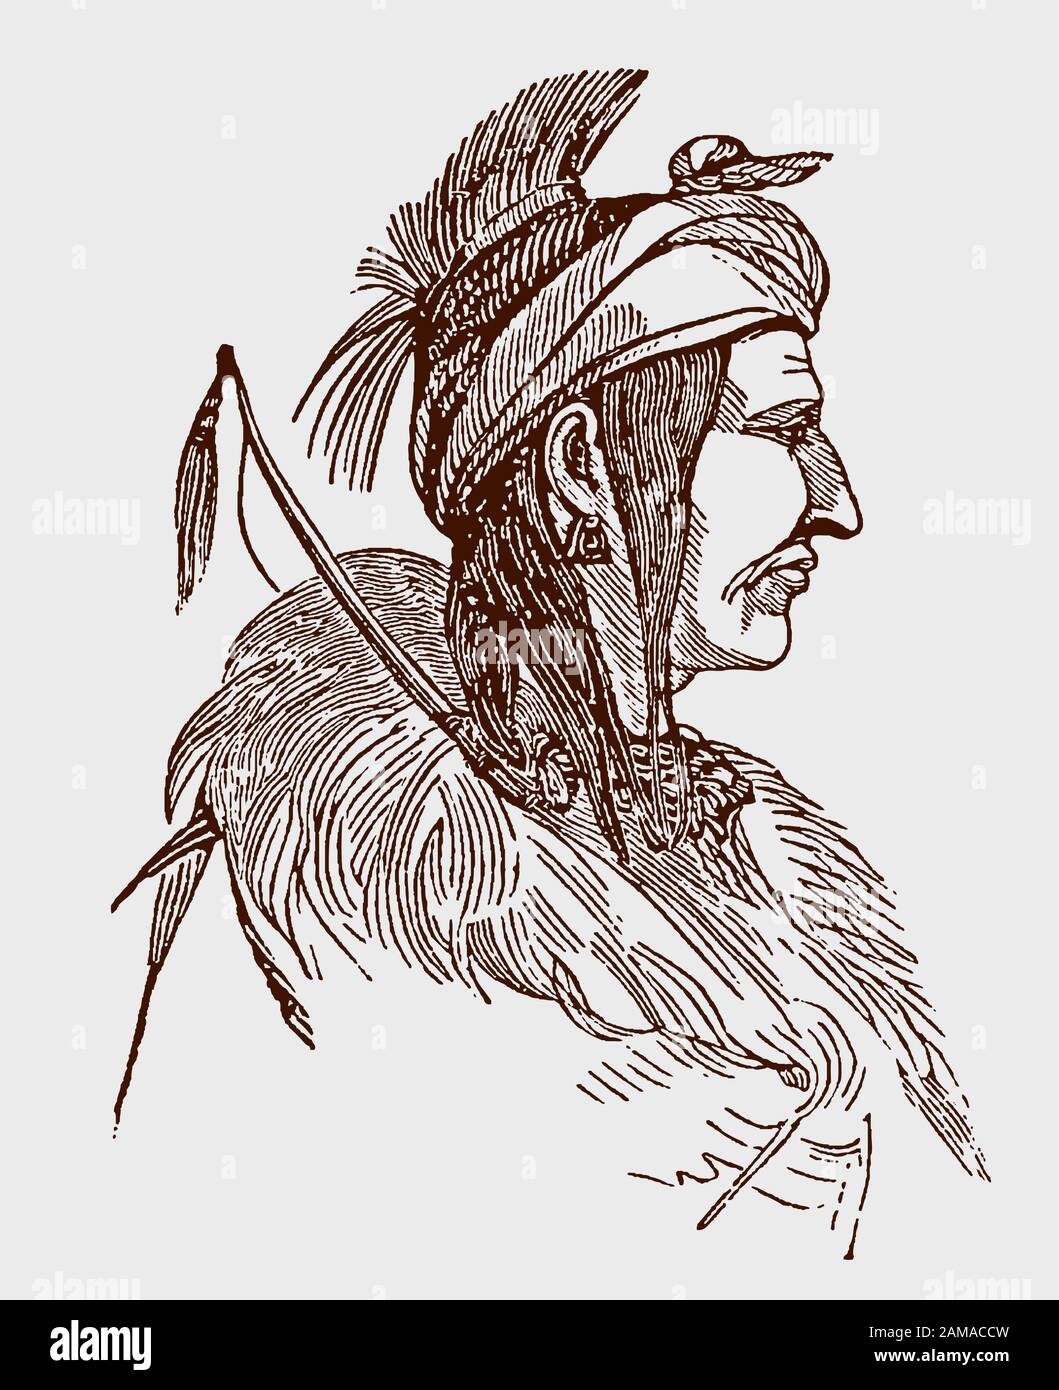 Portrait of kondiaronk, historic chief of the hurons in side view. Illustration after an engraving from the 19th century Stock Vector